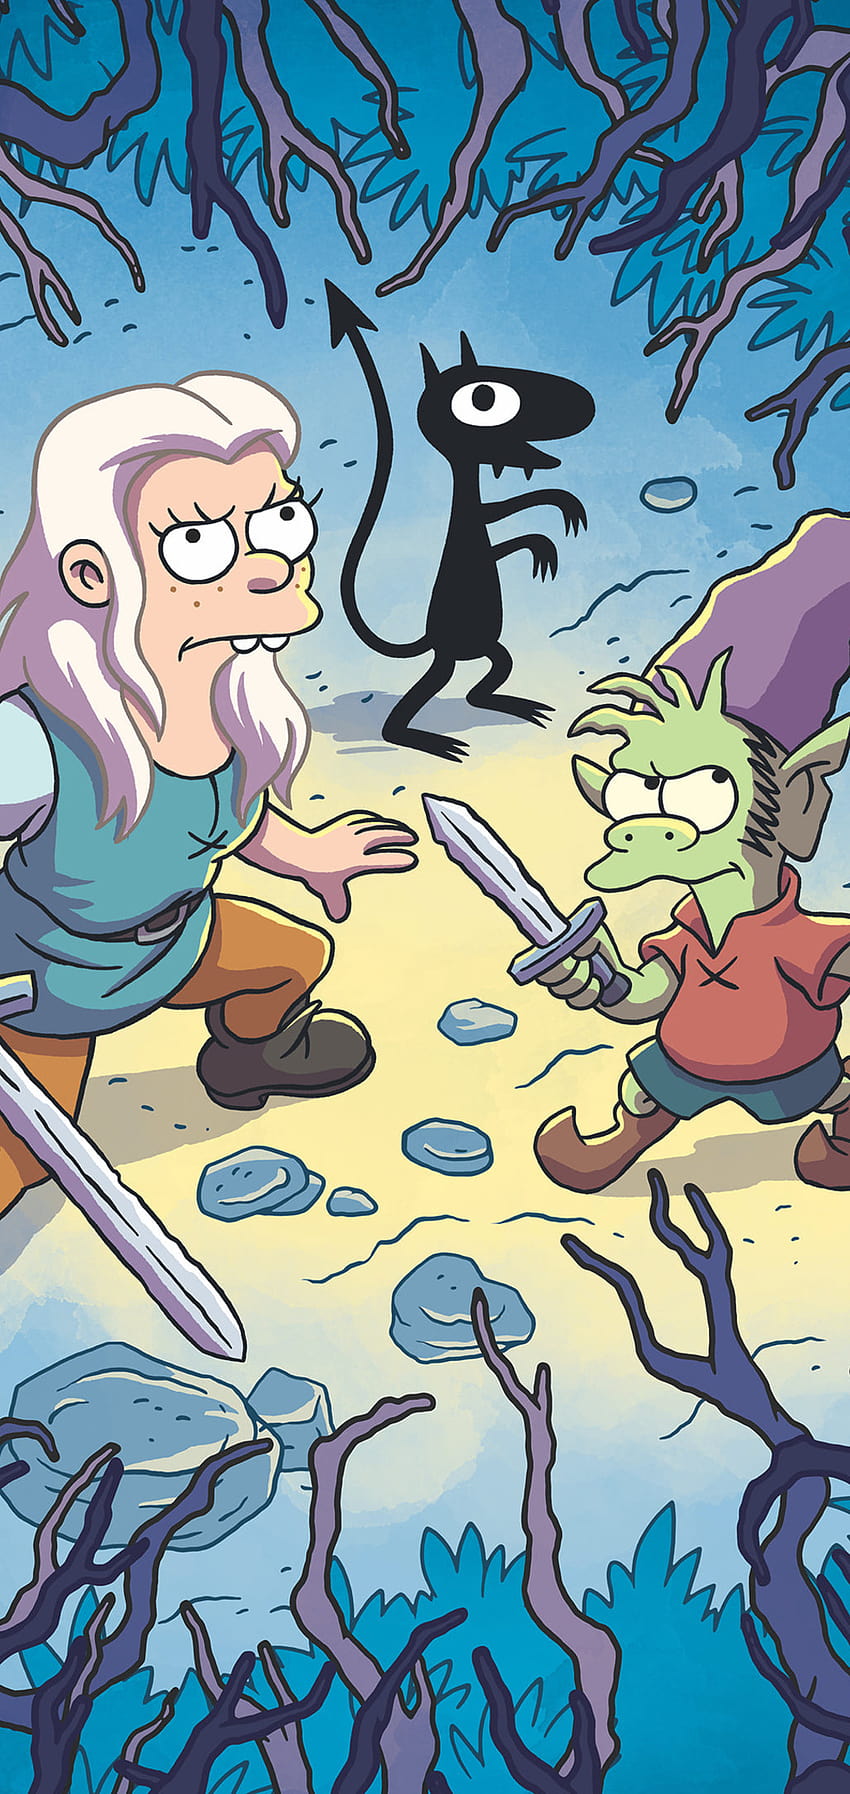 1080x2280 Disenchantment Netflix 2018 One Plus 6,Huawei p20,Honor view 10, Vivo y85,Oppo f7,Xiaomi Mi A2 , Backgrounds, and HD phone wallpaper